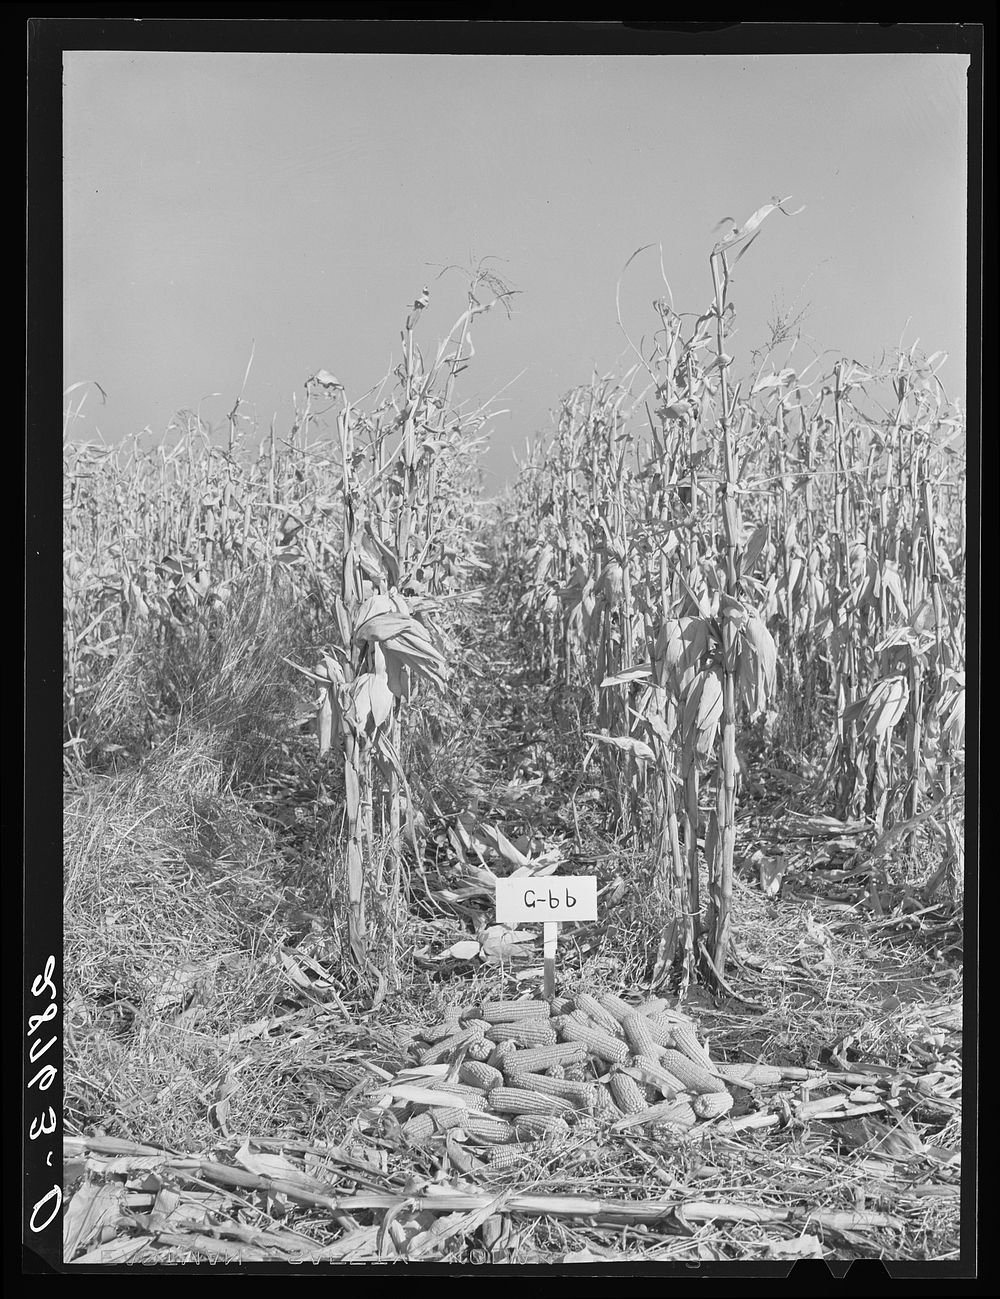 Test plot of hybrid corn. Grundy County, Iowa. Sourced from the Library of Congress.